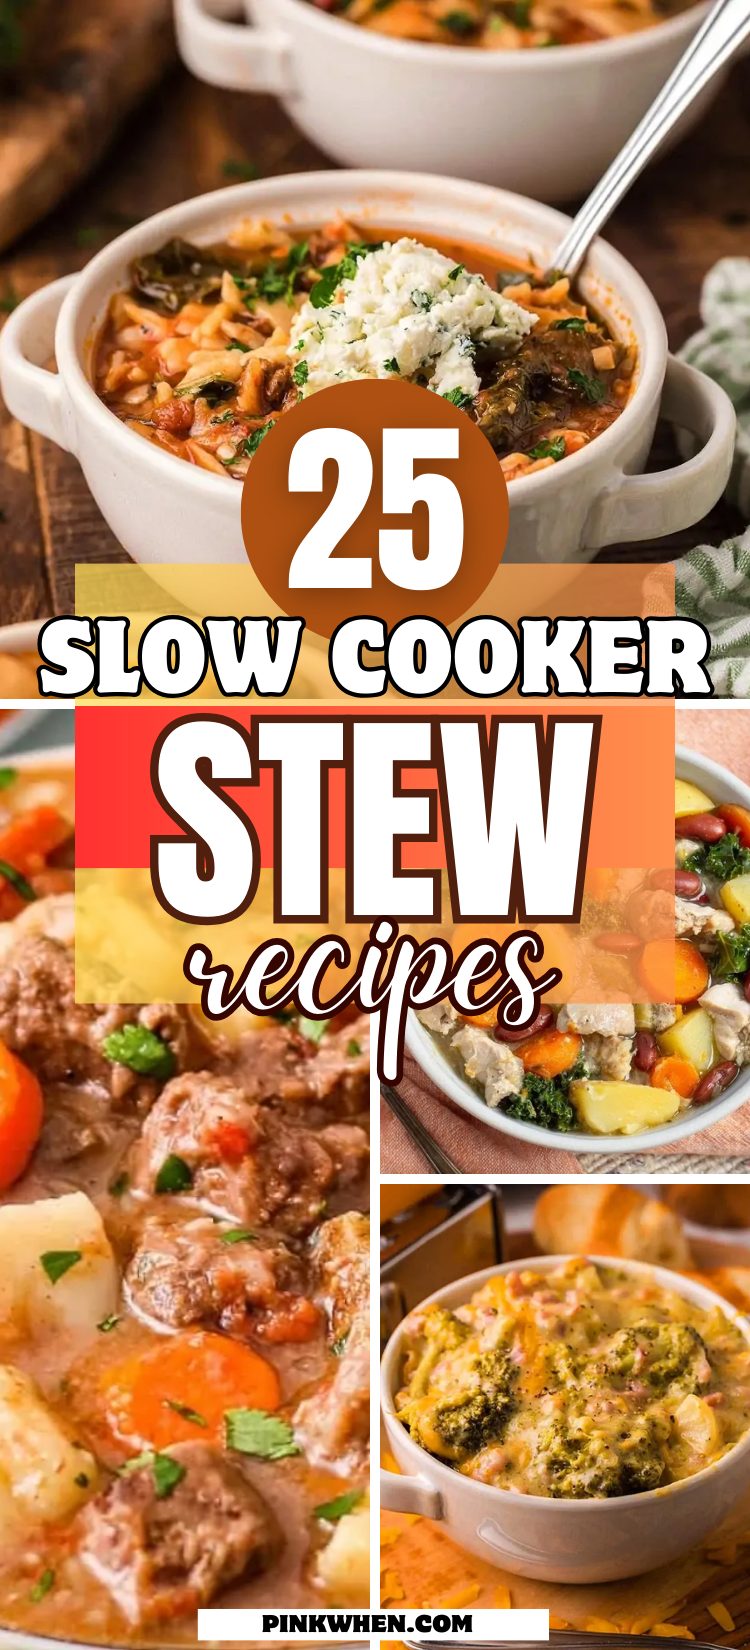 Slow Cooker Stew Recipes to Fill Your Stomach